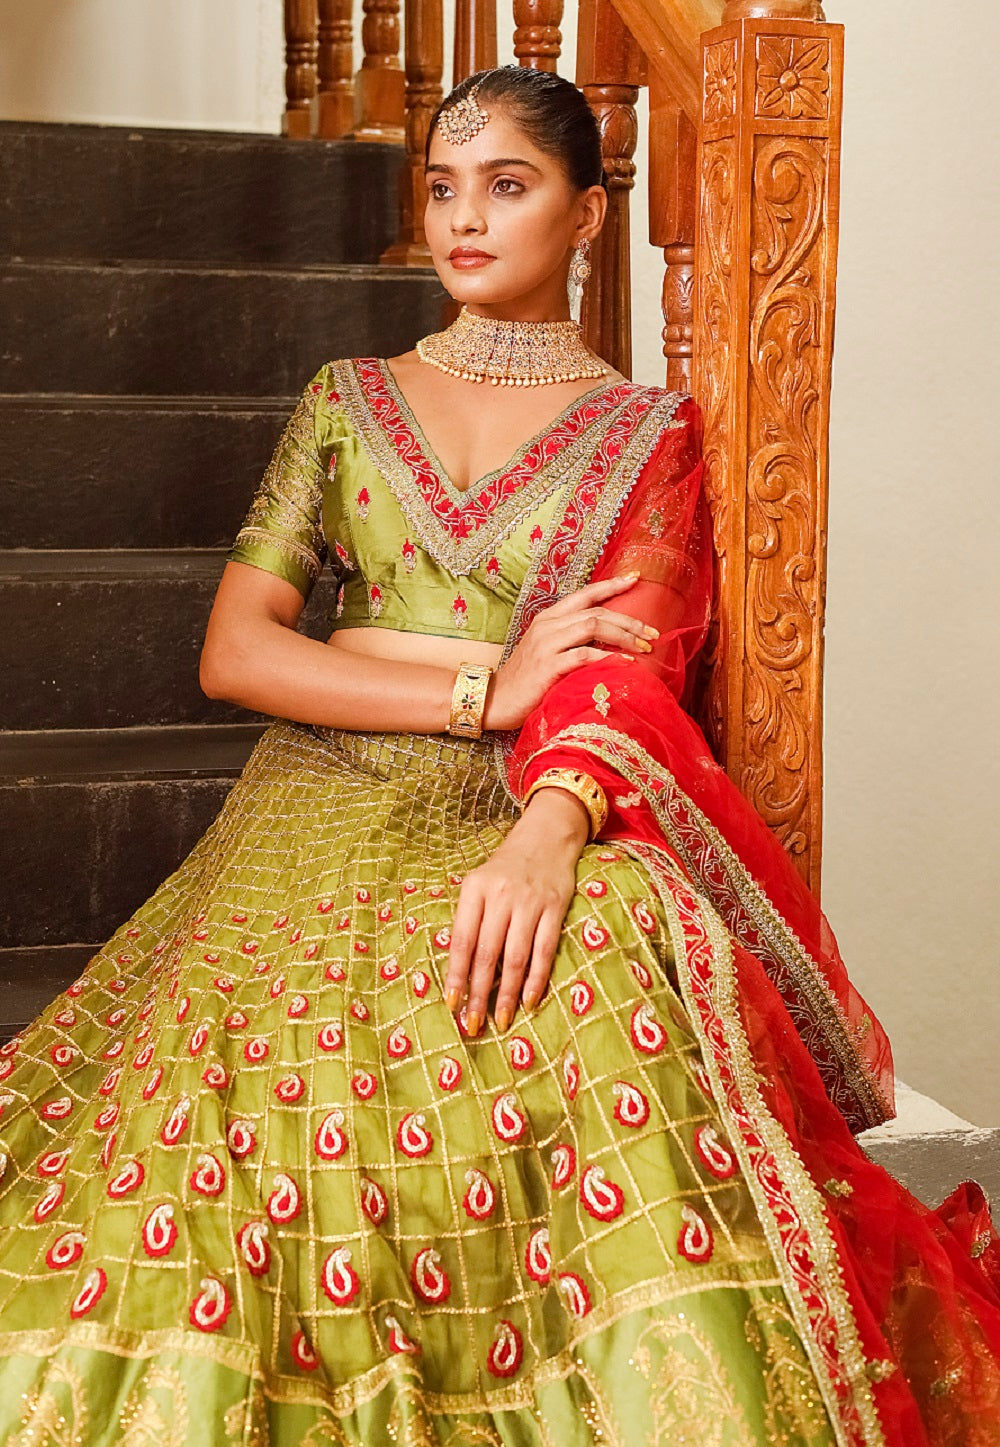 Net Embroidered Lehenga in Olive Green